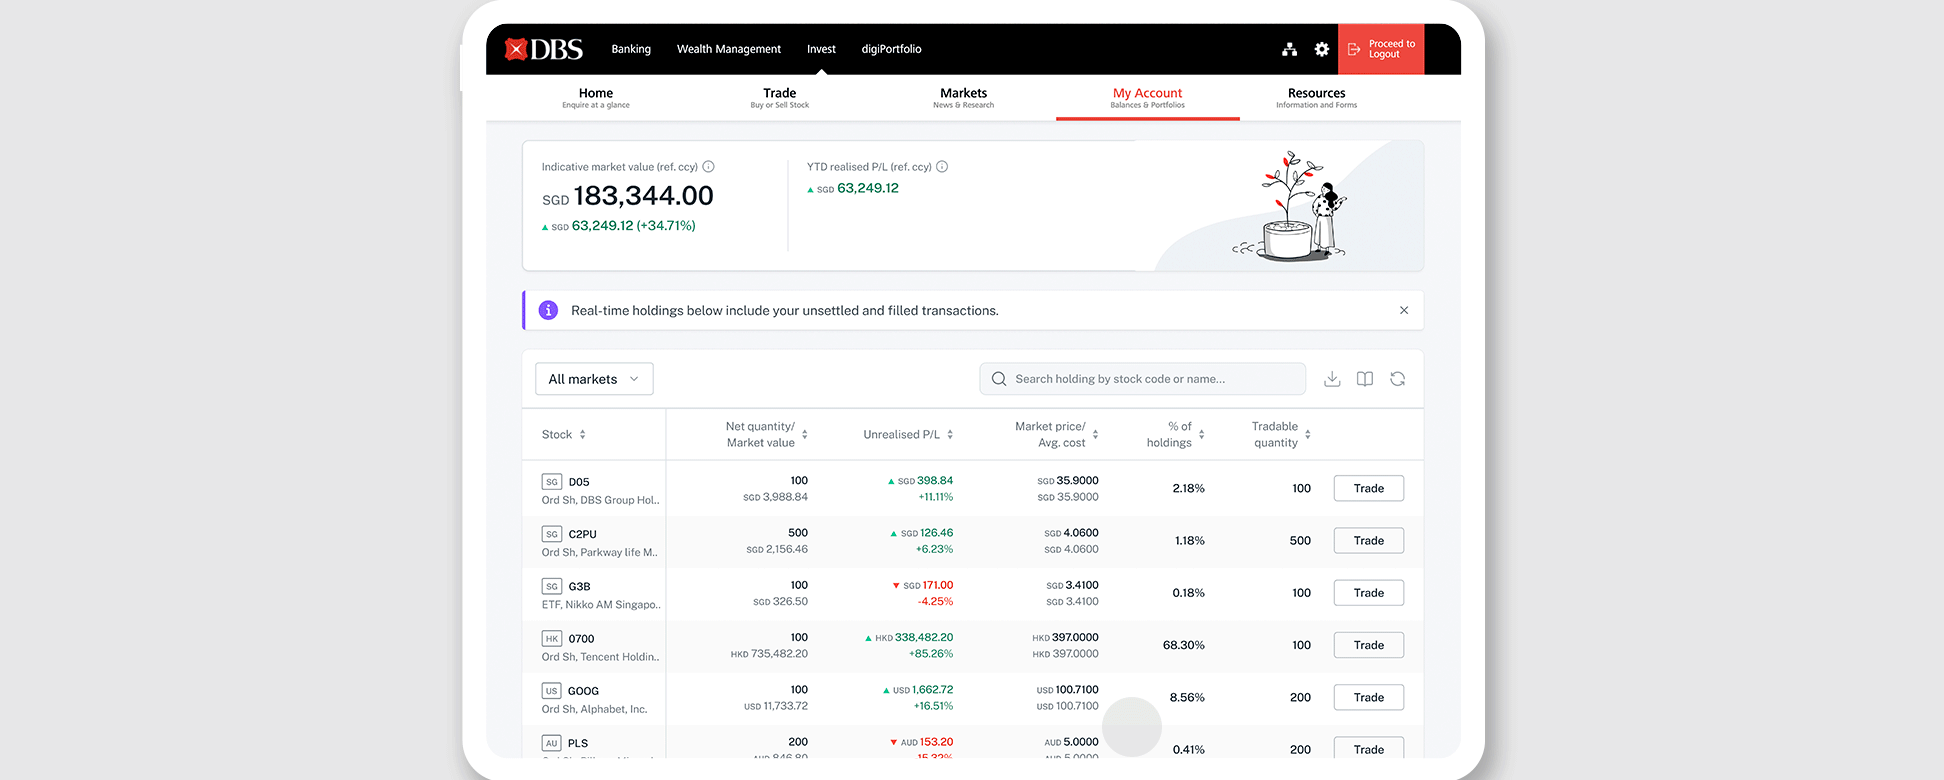 Get a clear picture of your holdings by market. Easy.​